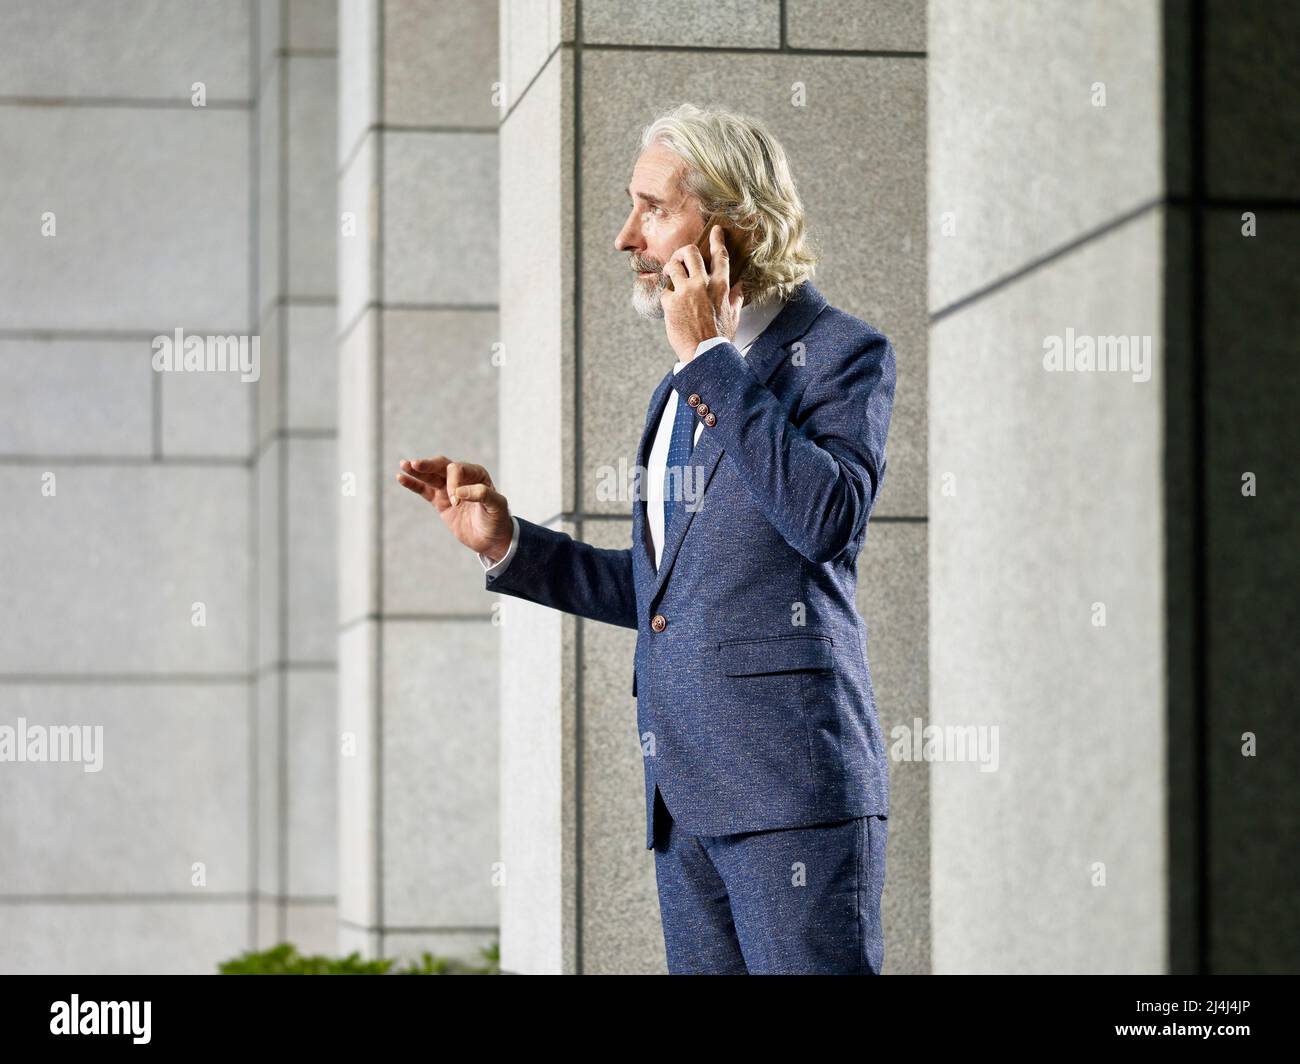 caucasian senior corporate executive standing in lobby of modern building talking on mobile phone. Stock Photo